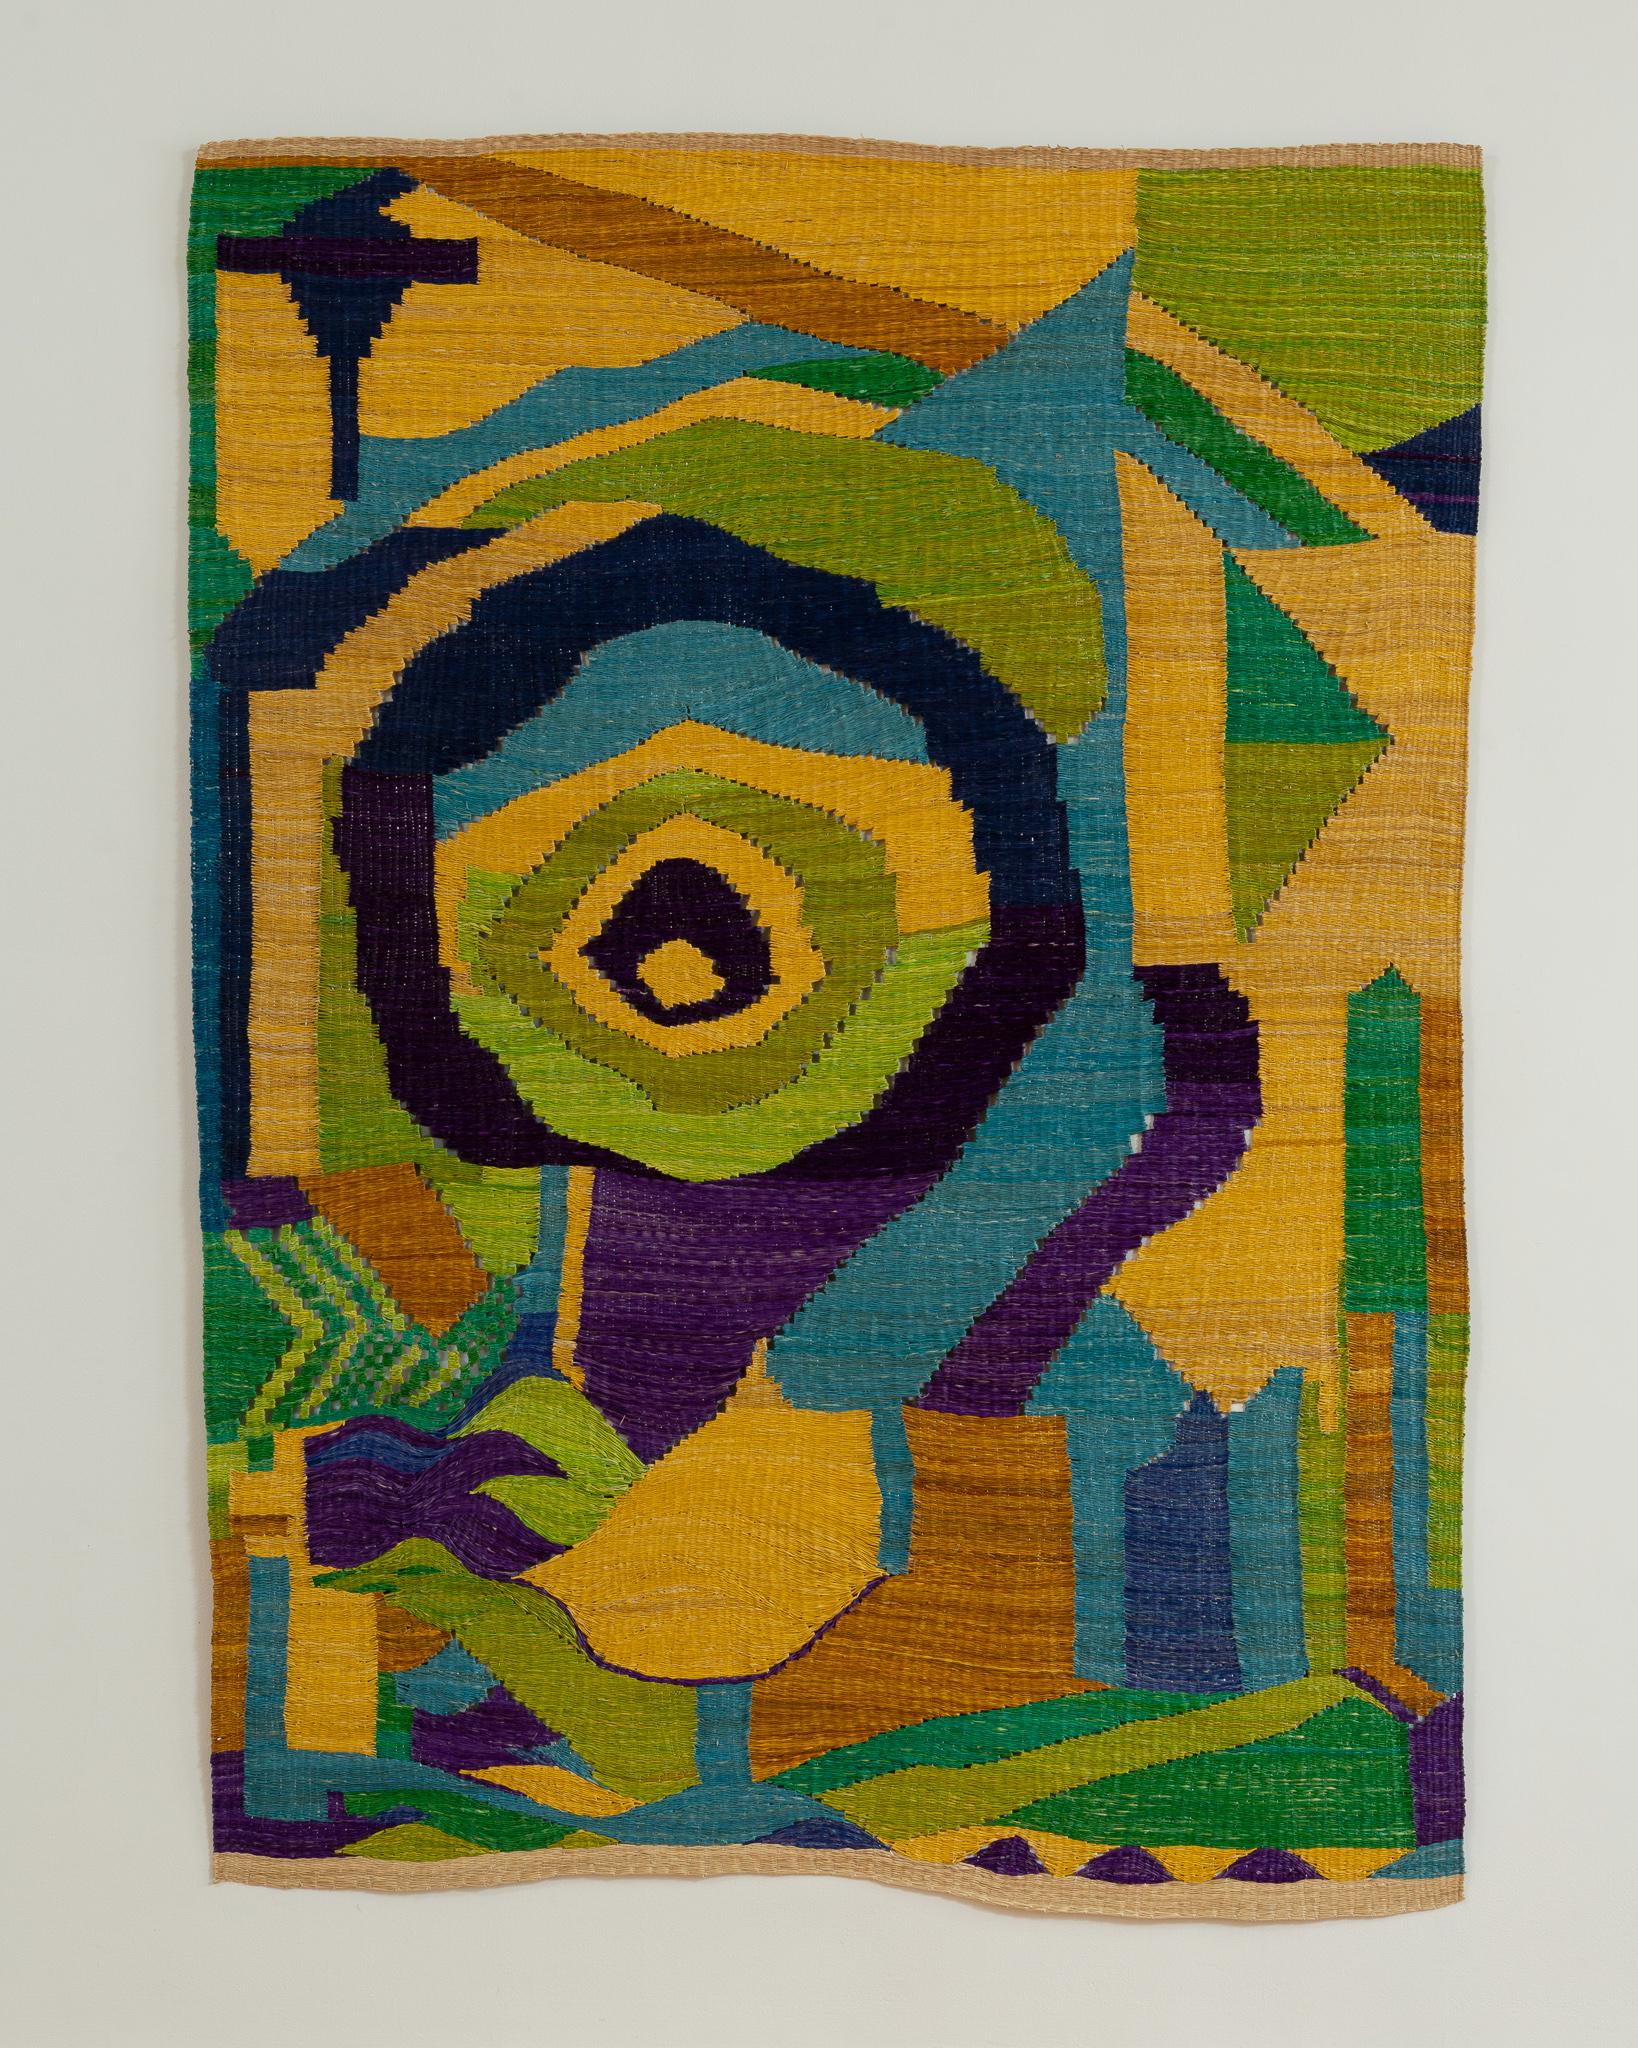 Large, boldly colorful and unique hand-woven decorative wall hanging or floor covering by celebrated New York and Medellín-based artist Chris Wolston. 

Entitled 